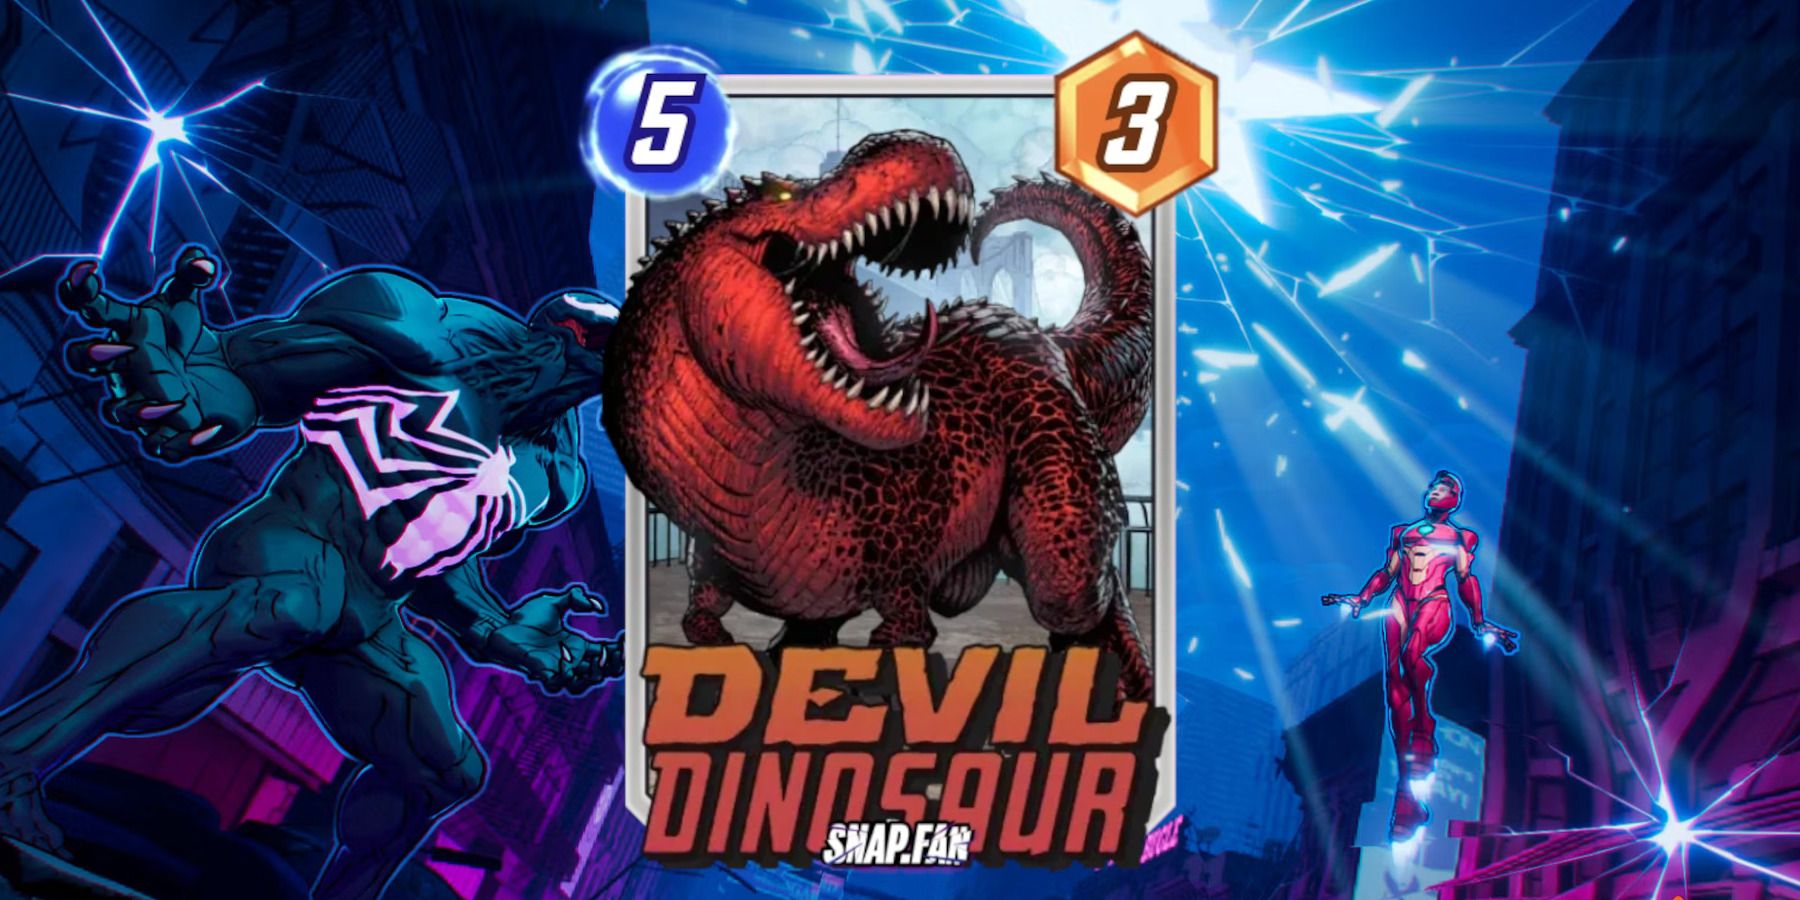 The Devil Dinosaur card in Marvel Snap on top of promotional art for the game